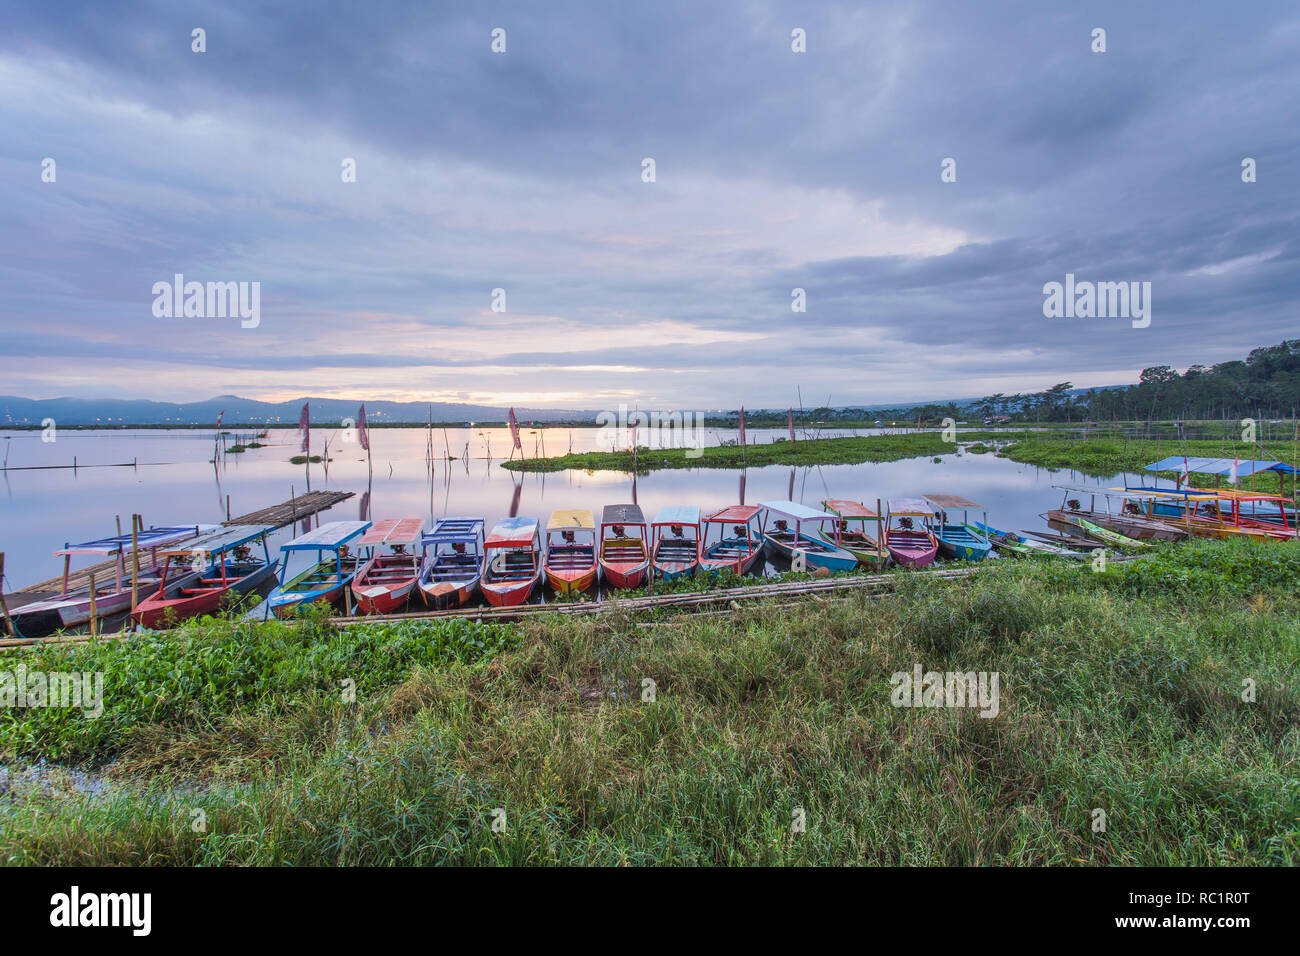 Colorful tourist boats parked at side of Rawa Pening Lake, Central Java, Indonesia Stock Photo